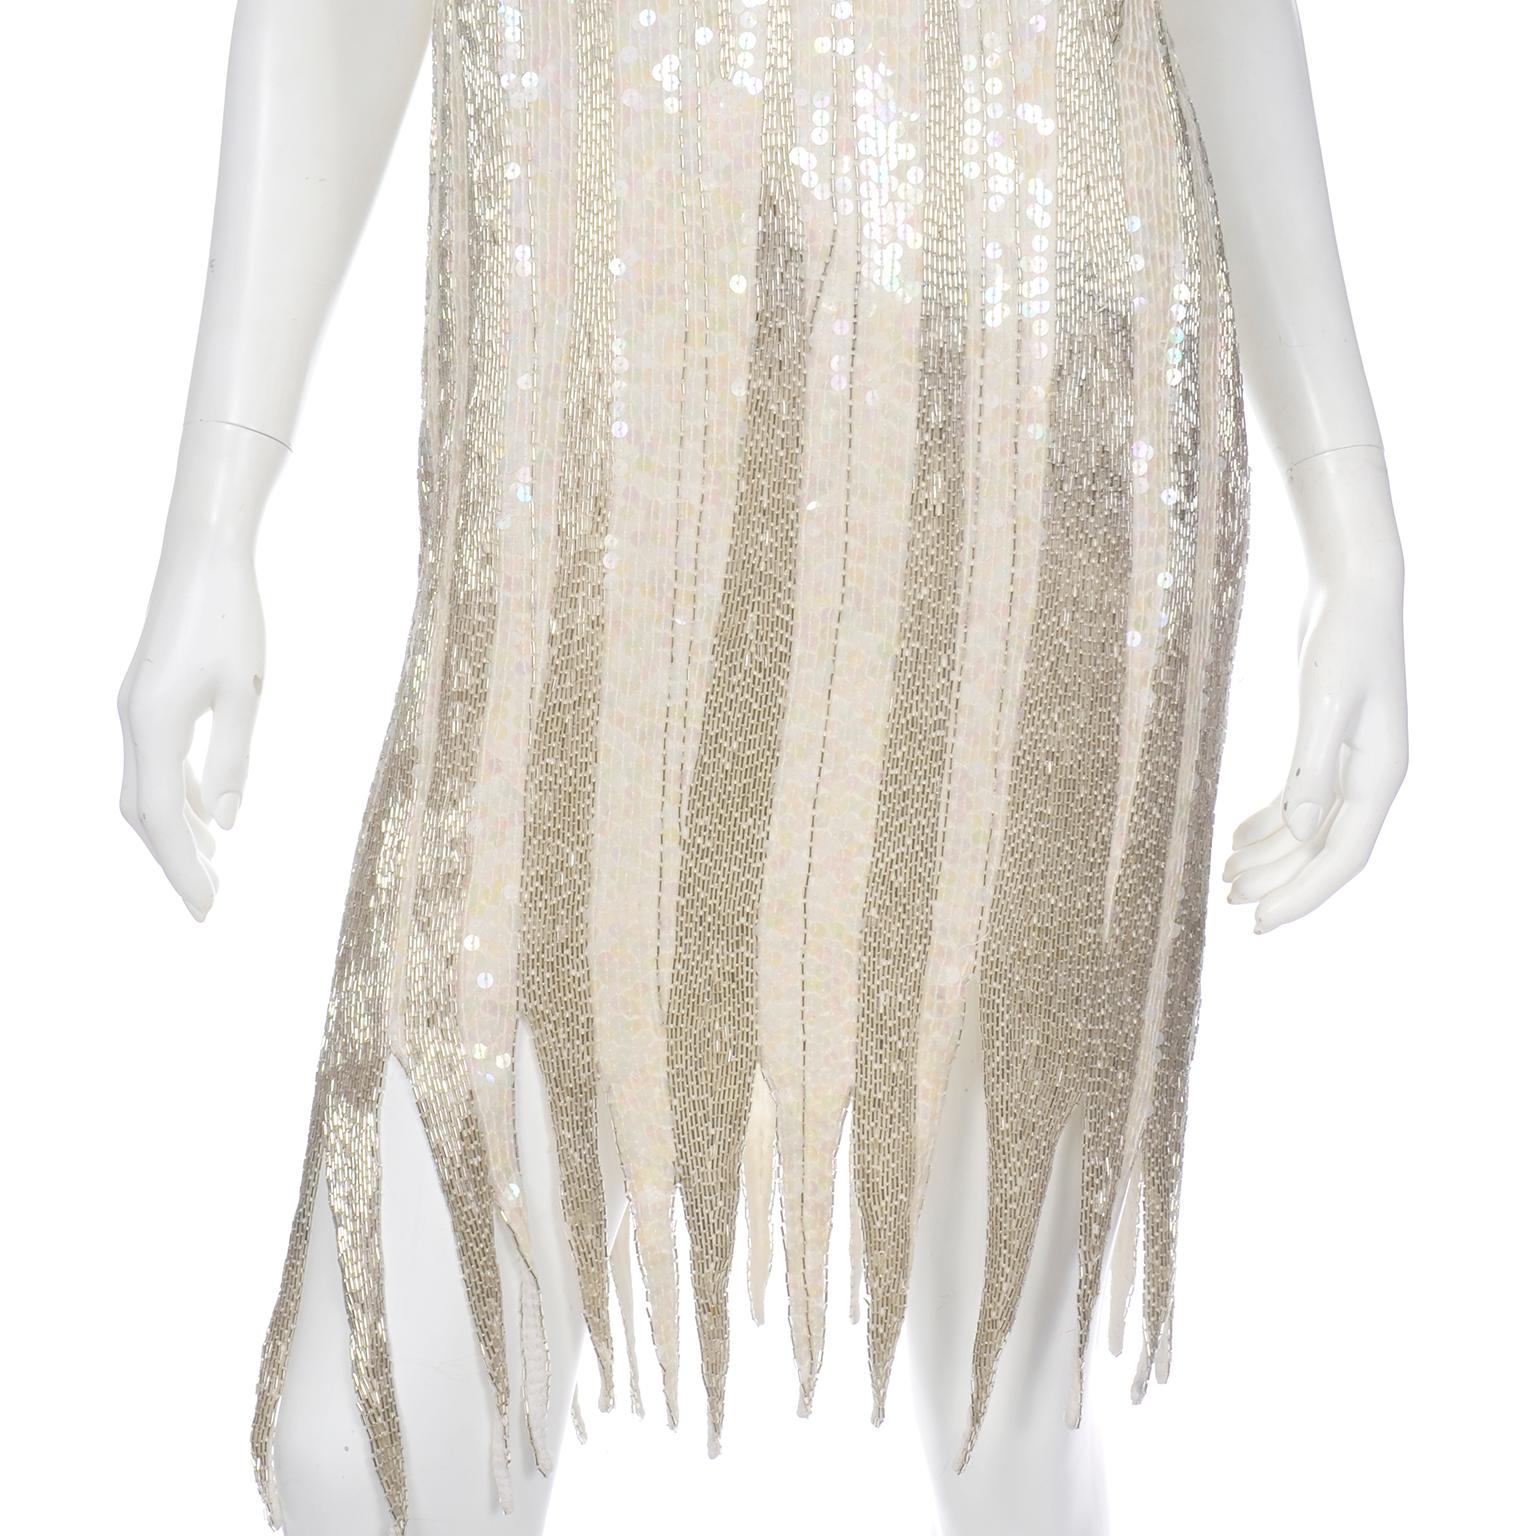 20s Inspired White & Silver Beaded Flapper Style Evening Dress w Beads & Sequins 2